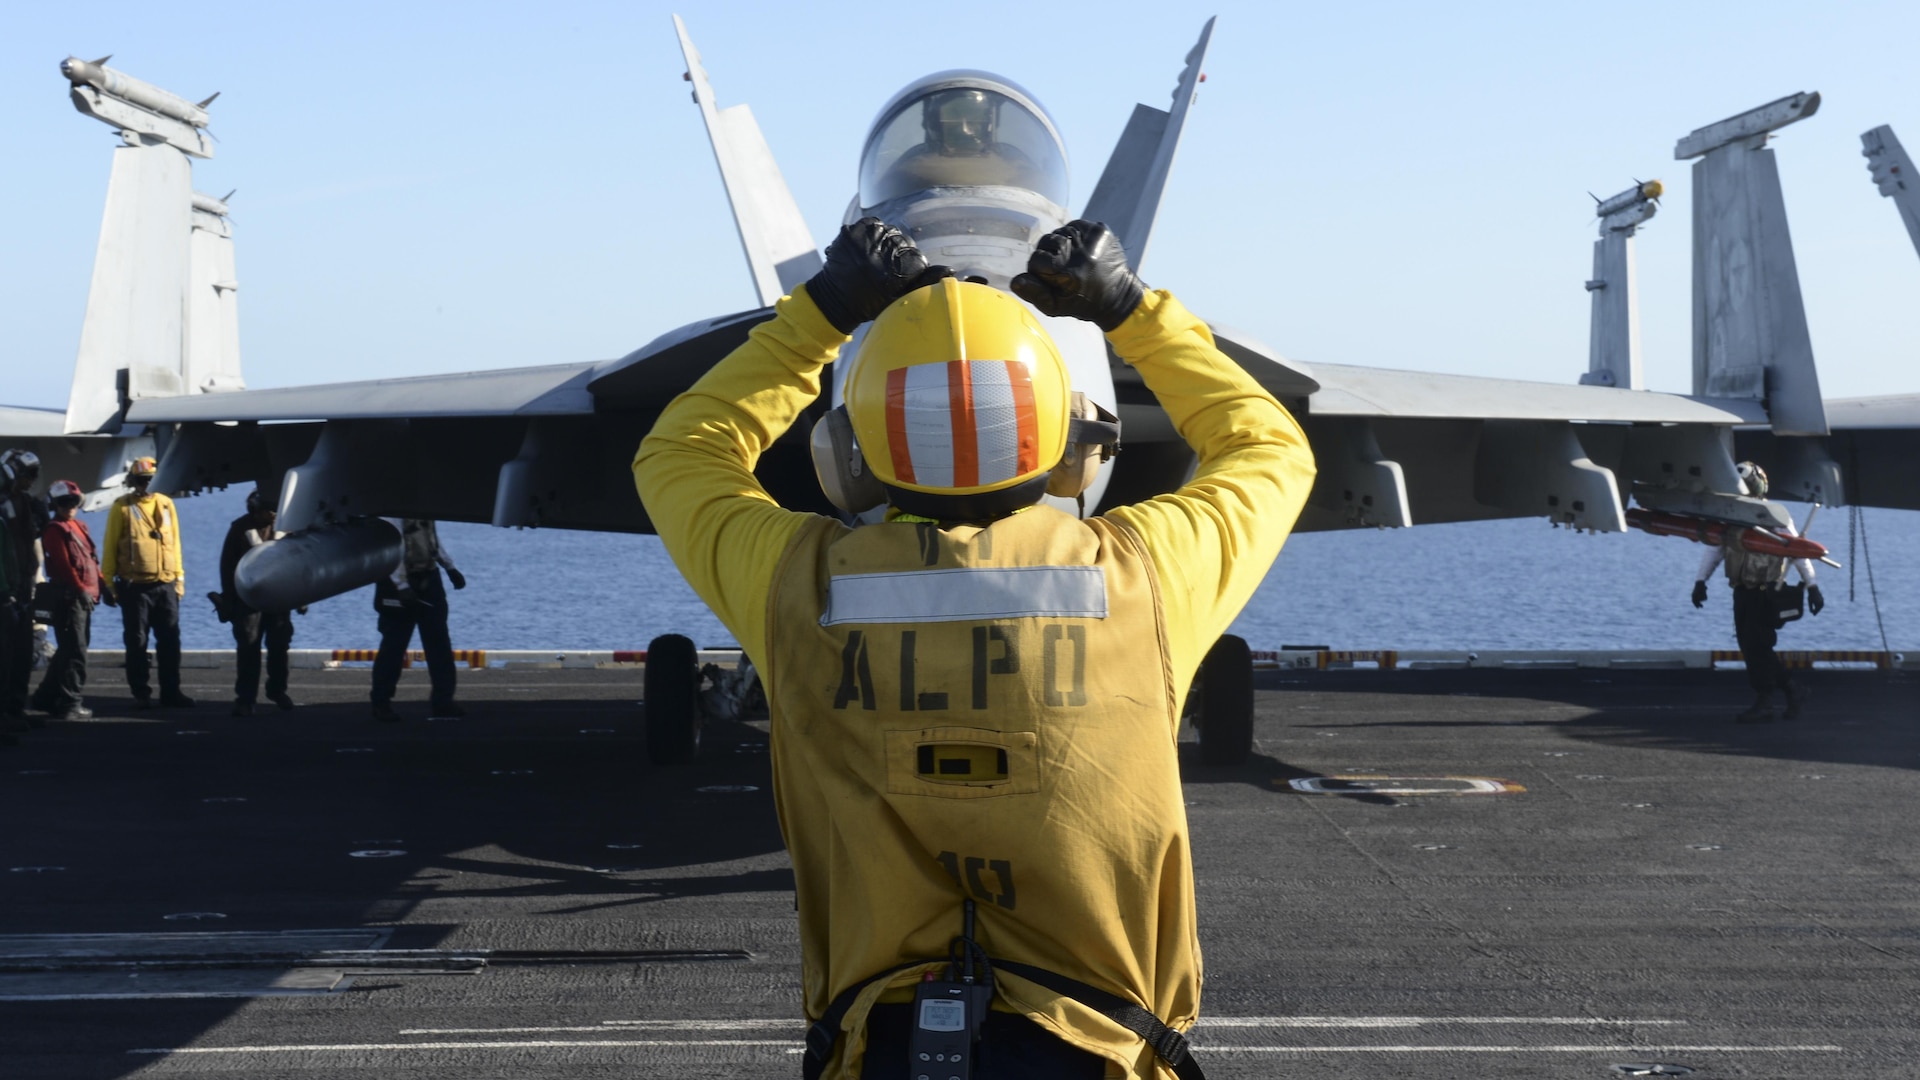 U.S. Navy Aviation Boatswain's Mate (Handling) 1st Class Ryan Hilliard, a native of Erie, Pa., directs an aircraft on the flight deck of the aircraft carrier USS Nimitz (CVN 68) April 7, 2017. Nimitz is currently underway in the Pacific Ocean conducting Composite Training Unit Exercise (COMPTUEX) with the Nimitz Carrier Strike Group in preparation for an upcoming deployment. COMPTUEX tests a carrier strike group's mission-readiness and ability to perform as an integrated unit through simulated real-world scenarios. 